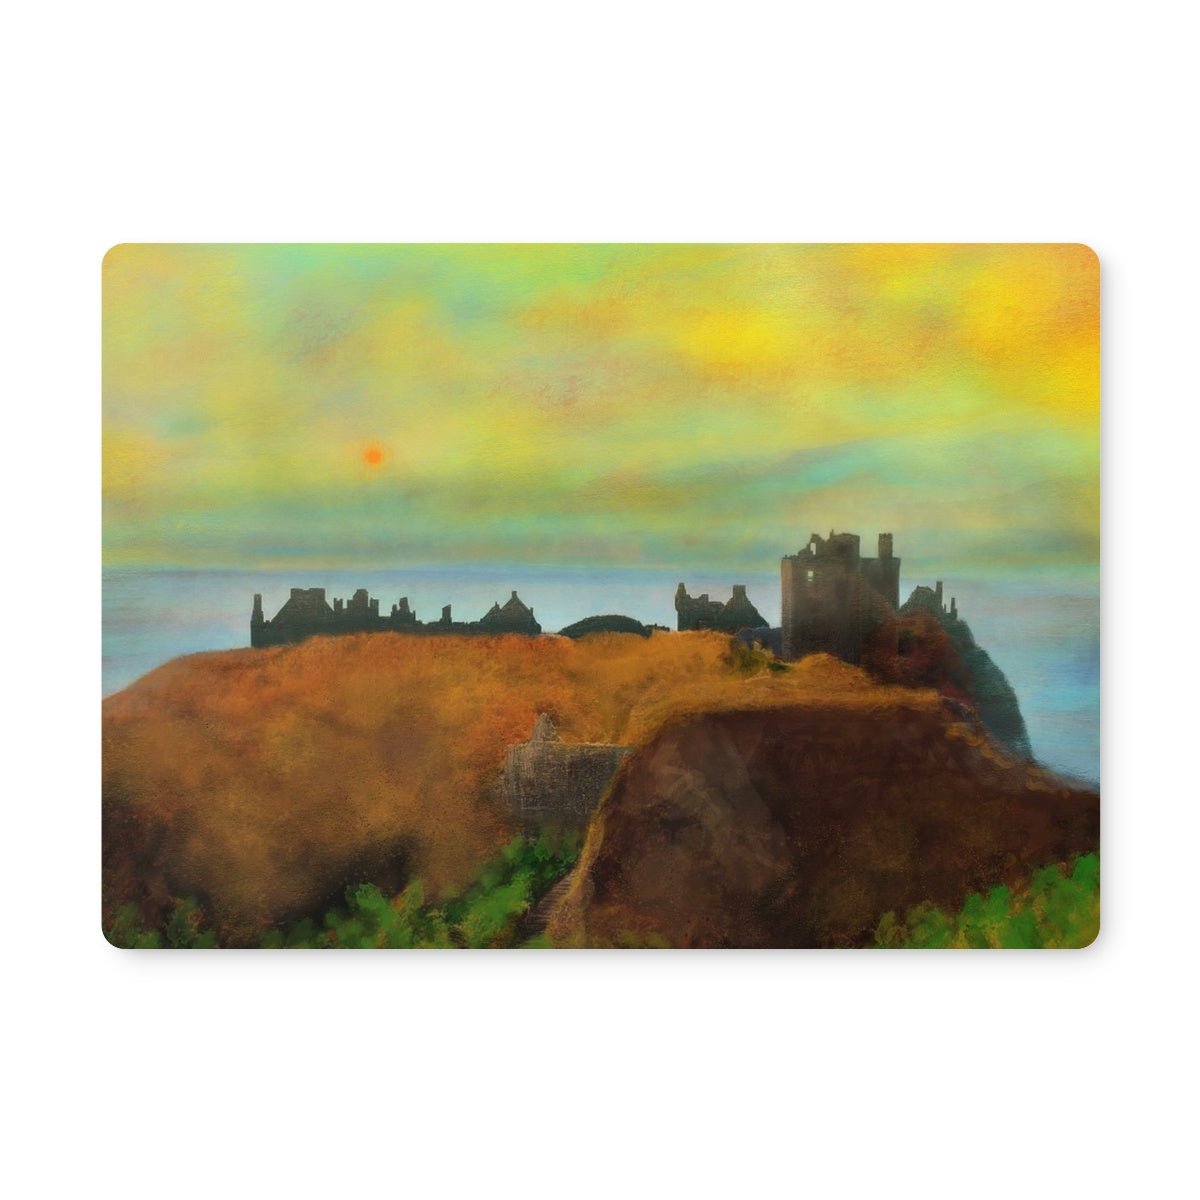 Dunnottar Castle Dusk Art Gifts Placemat-Placemats-Historic & Iconic Scotland Art Gallery-2 Placemats-Paintings, Prints, Homeware, Art Gifts From Scotland By Scottish Artist Kevin Hunter